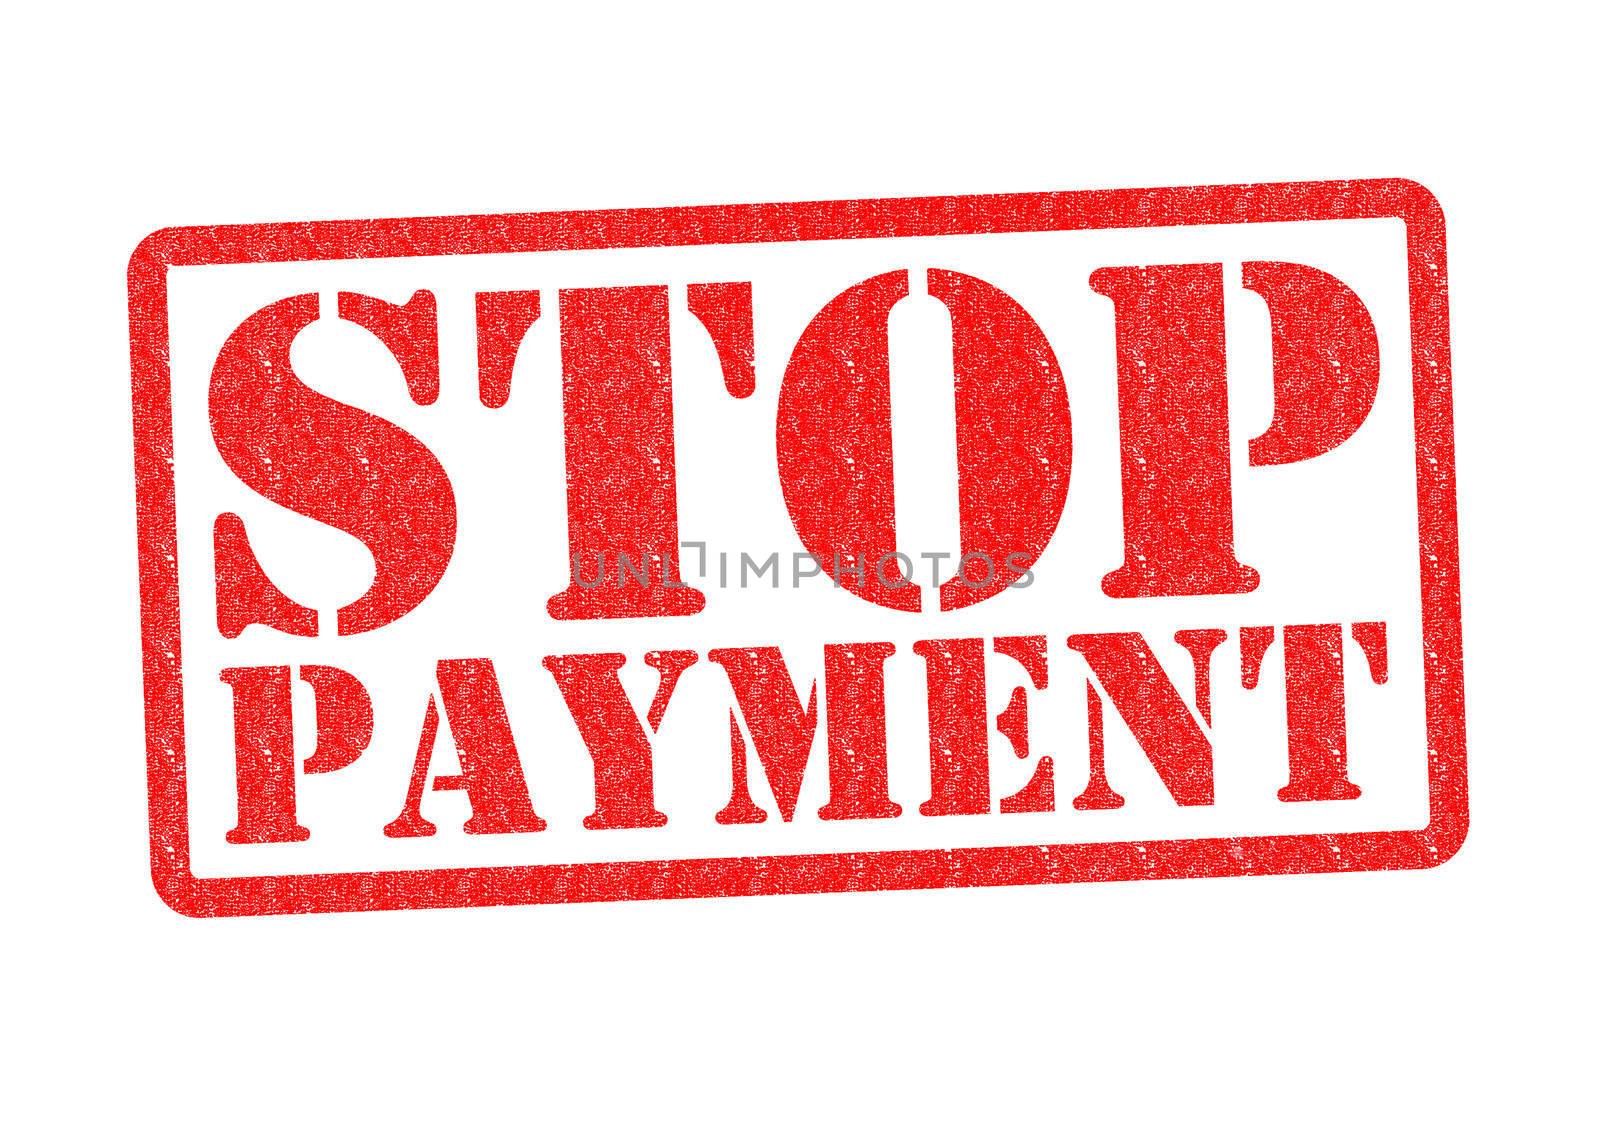 STOP PAYMENT Rubber Stamp over a white background.